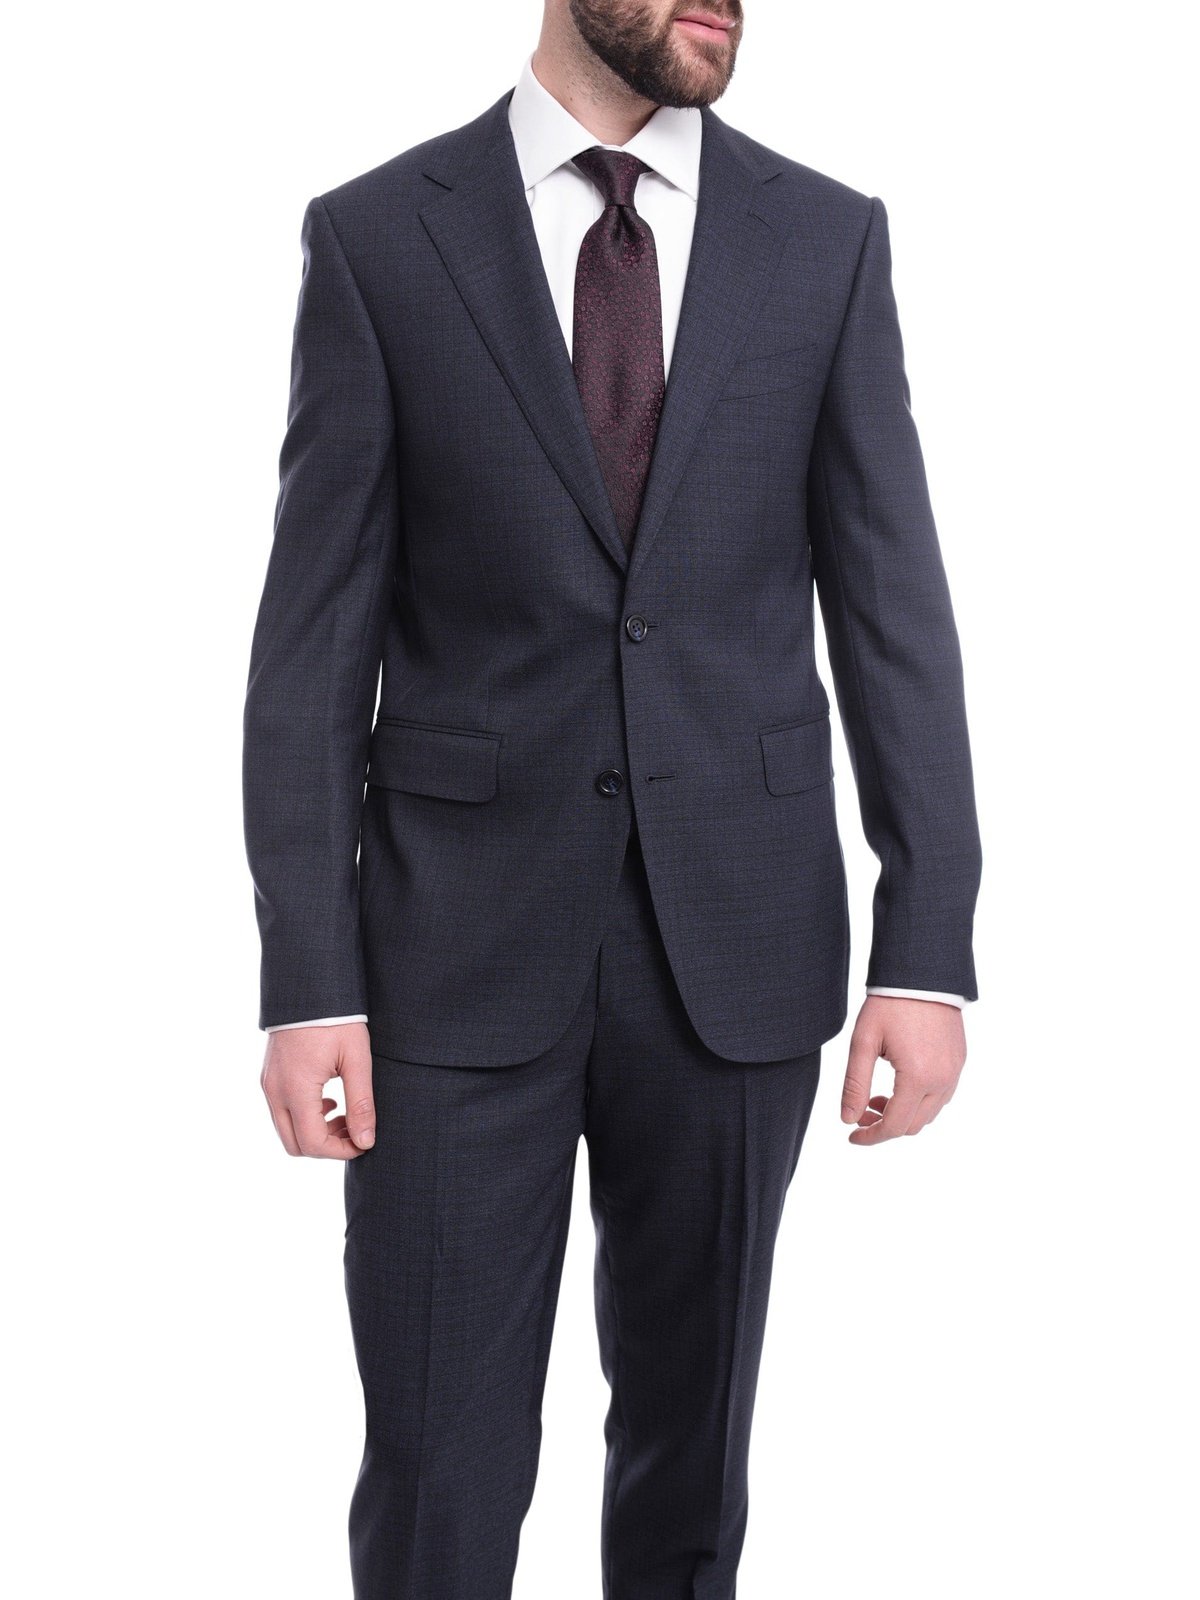 Napoli TWO PIECE SUITS Napoli Slim Fit Navy Blue Textured Check Two Button Half Canvassed Wool Suit